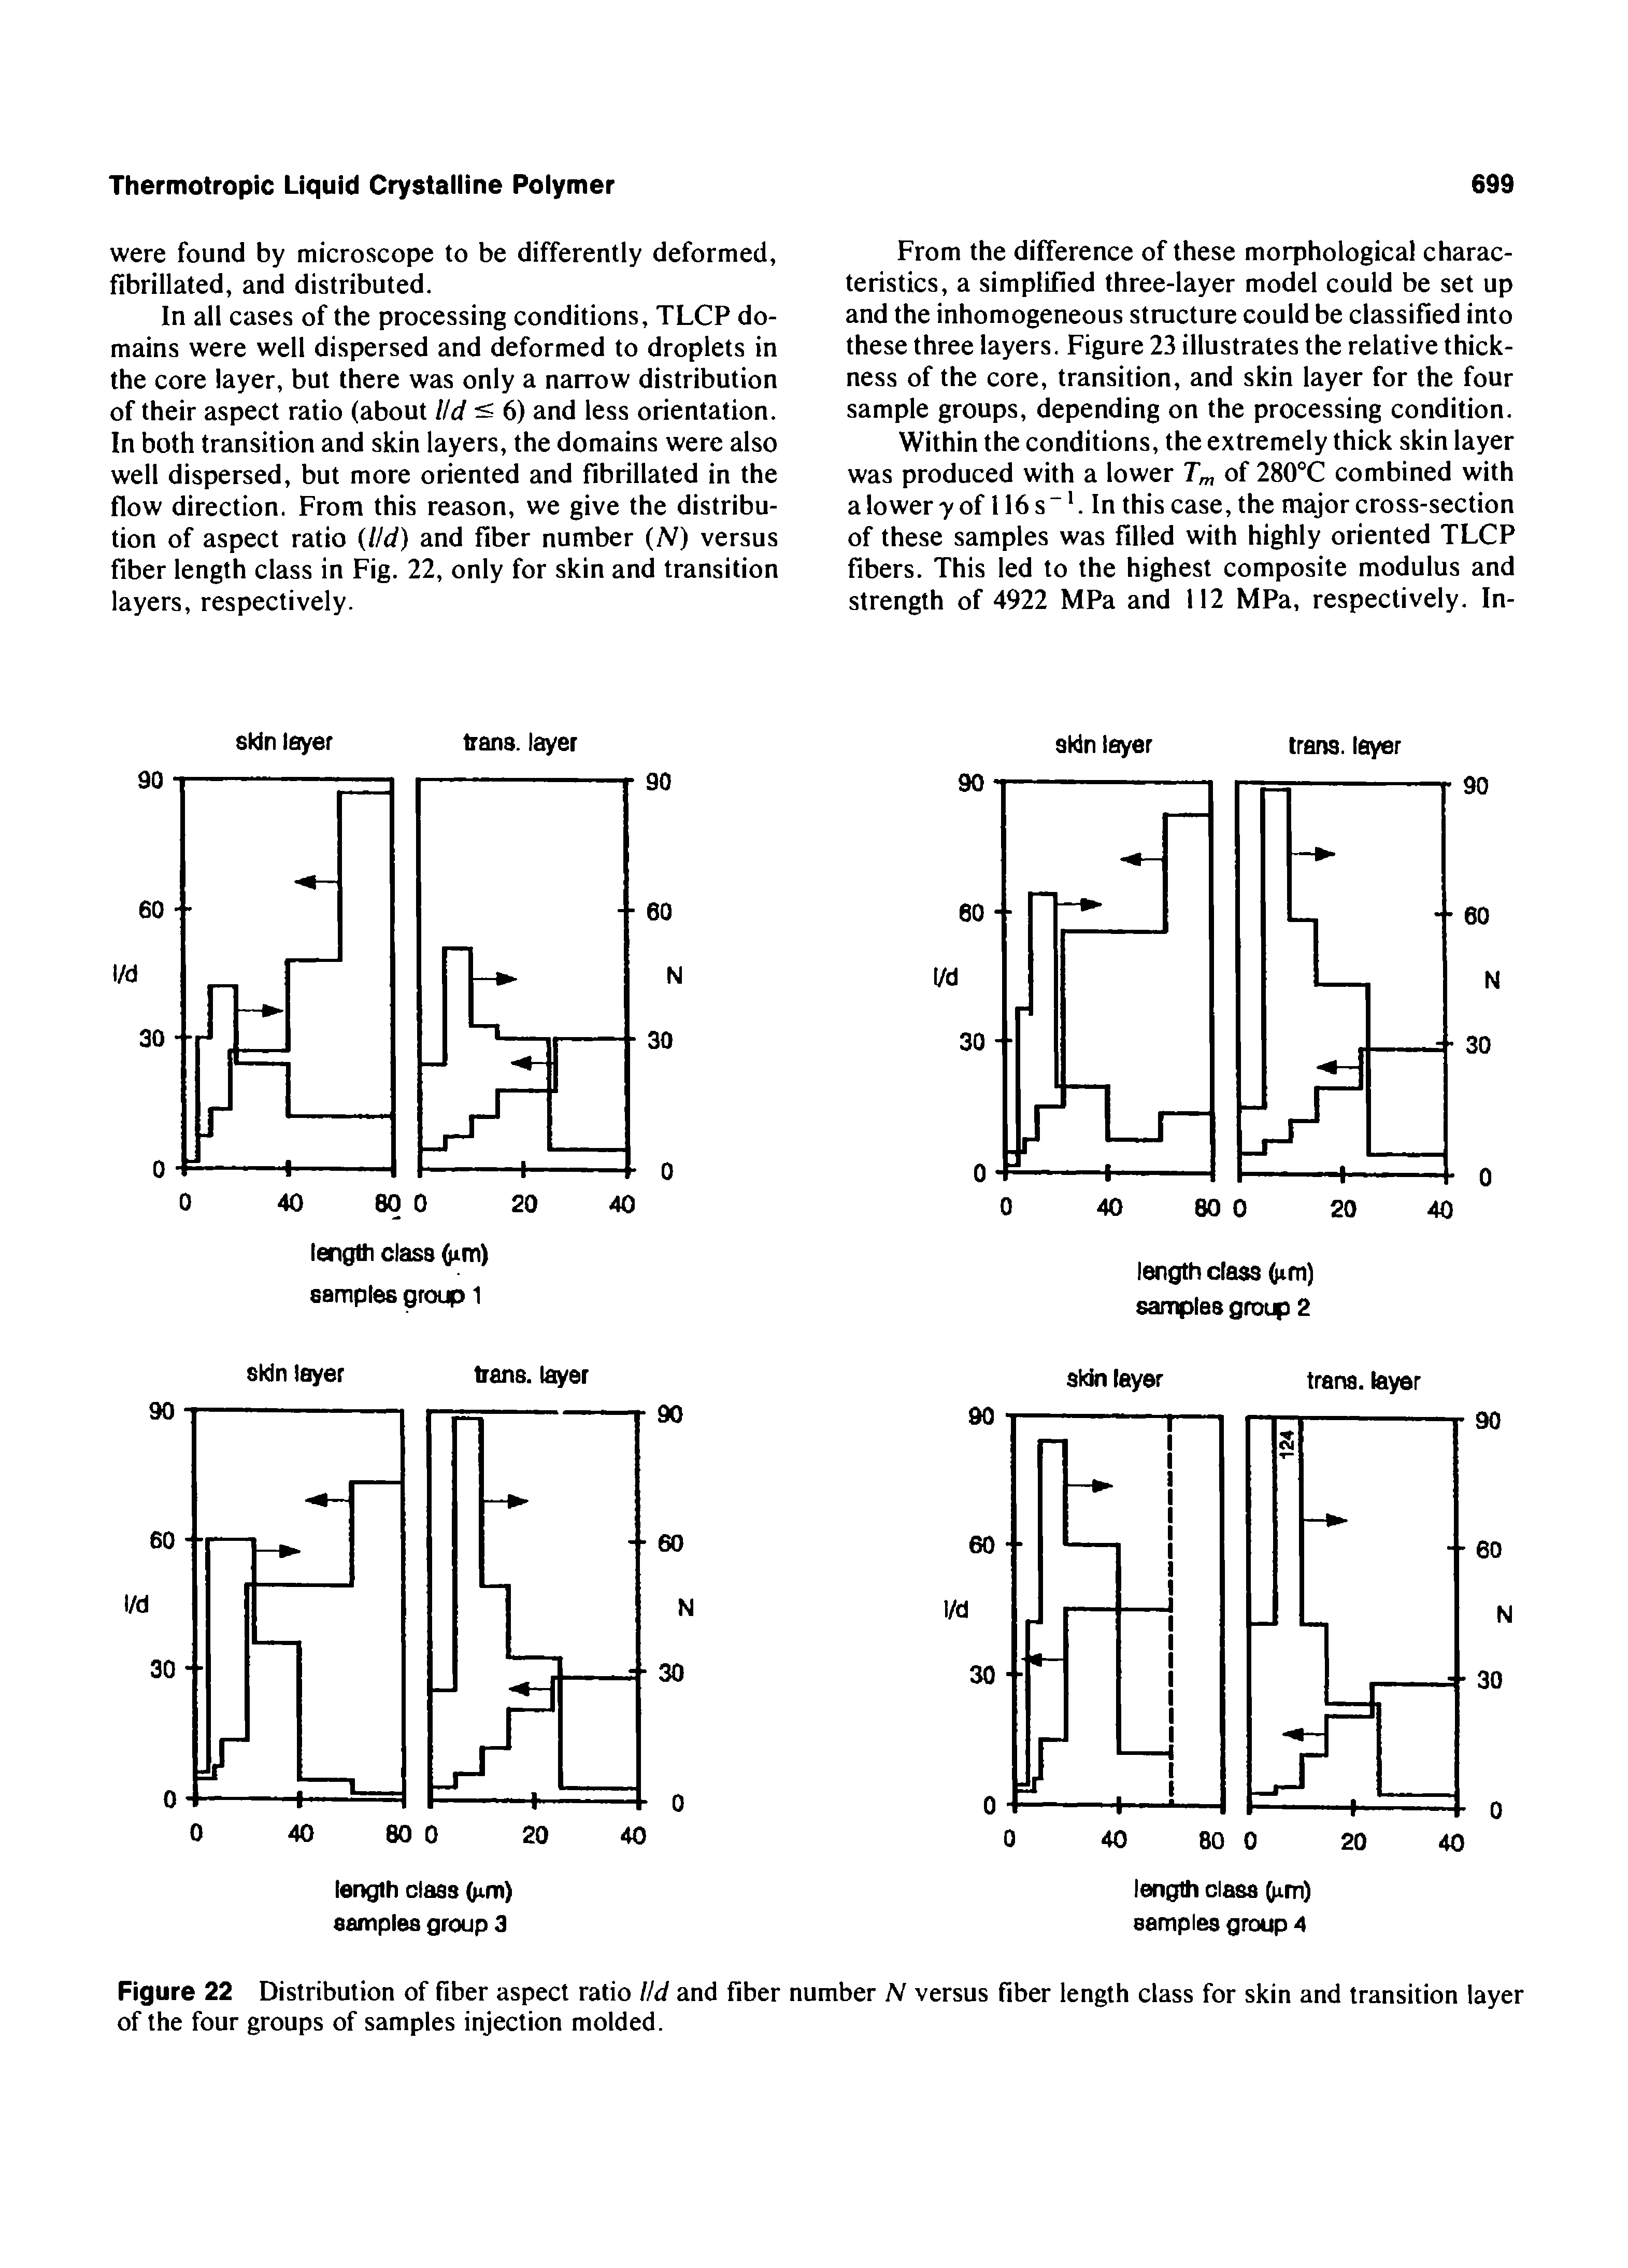 Figure 22 Distribution of fiber aspect ratio l/d and fiber number N versus fiber length class for skin and transition layer of the four groups of samples injection molded.